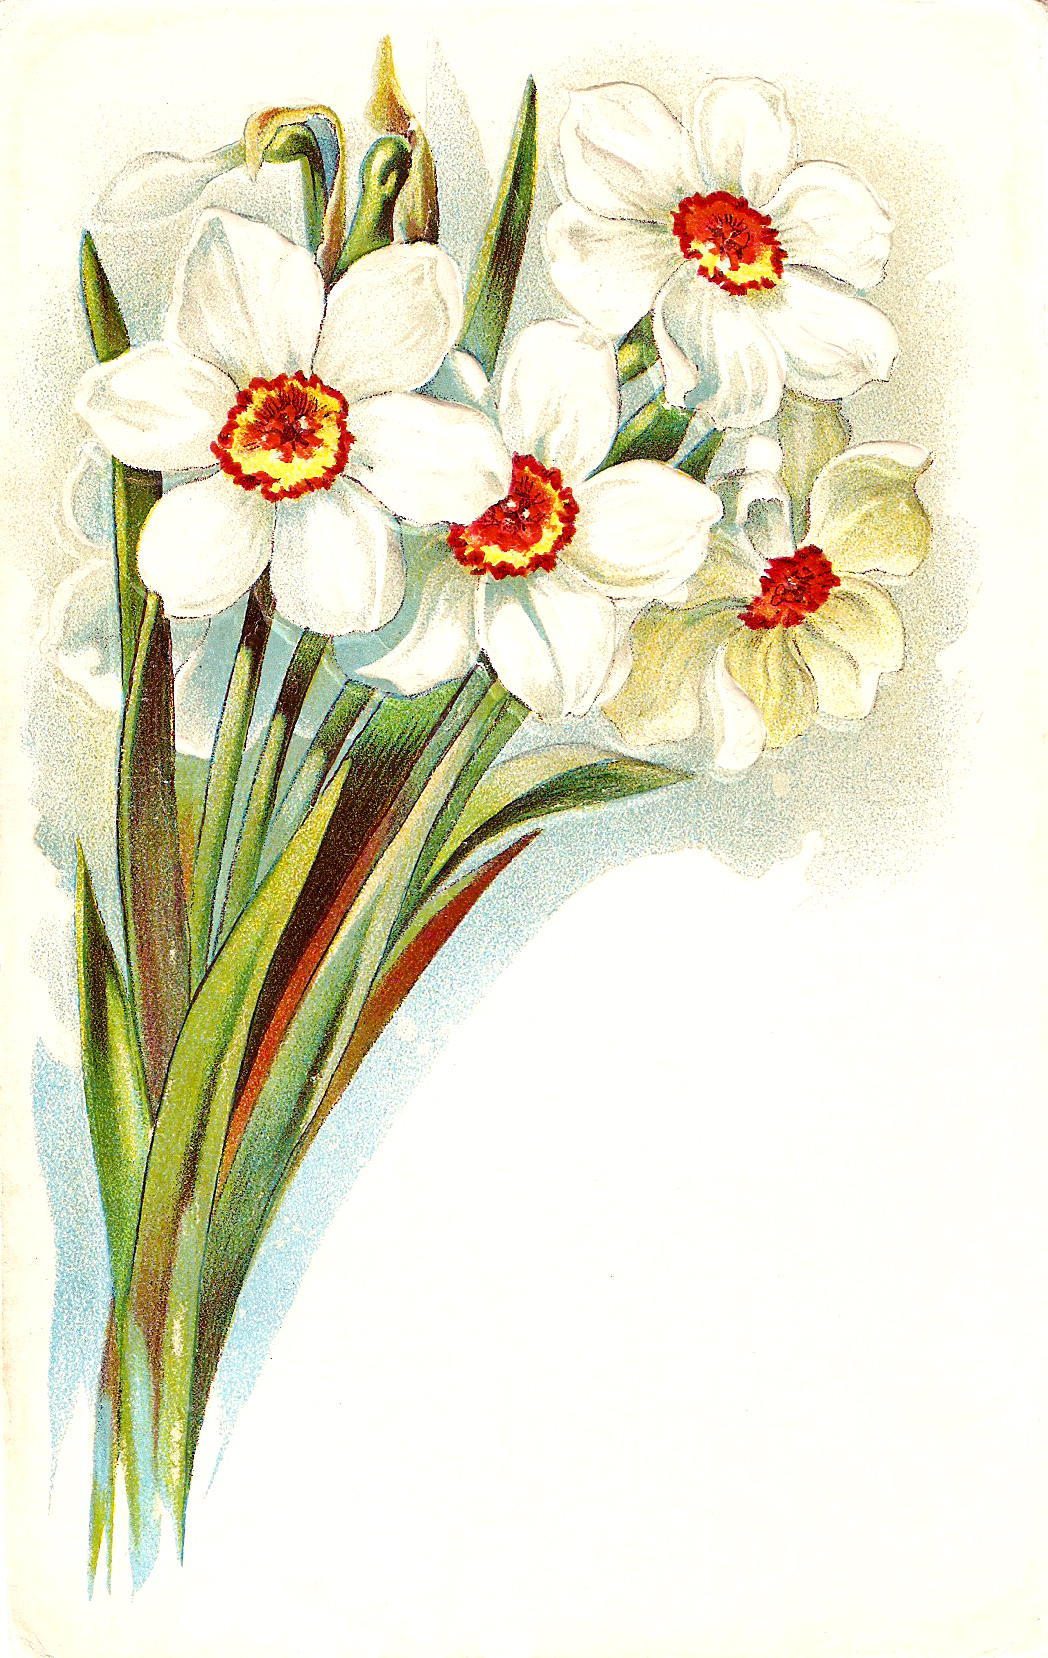 Here Is A Lovely Bouquet Of Daffodils Or Narcissus From A Victorian